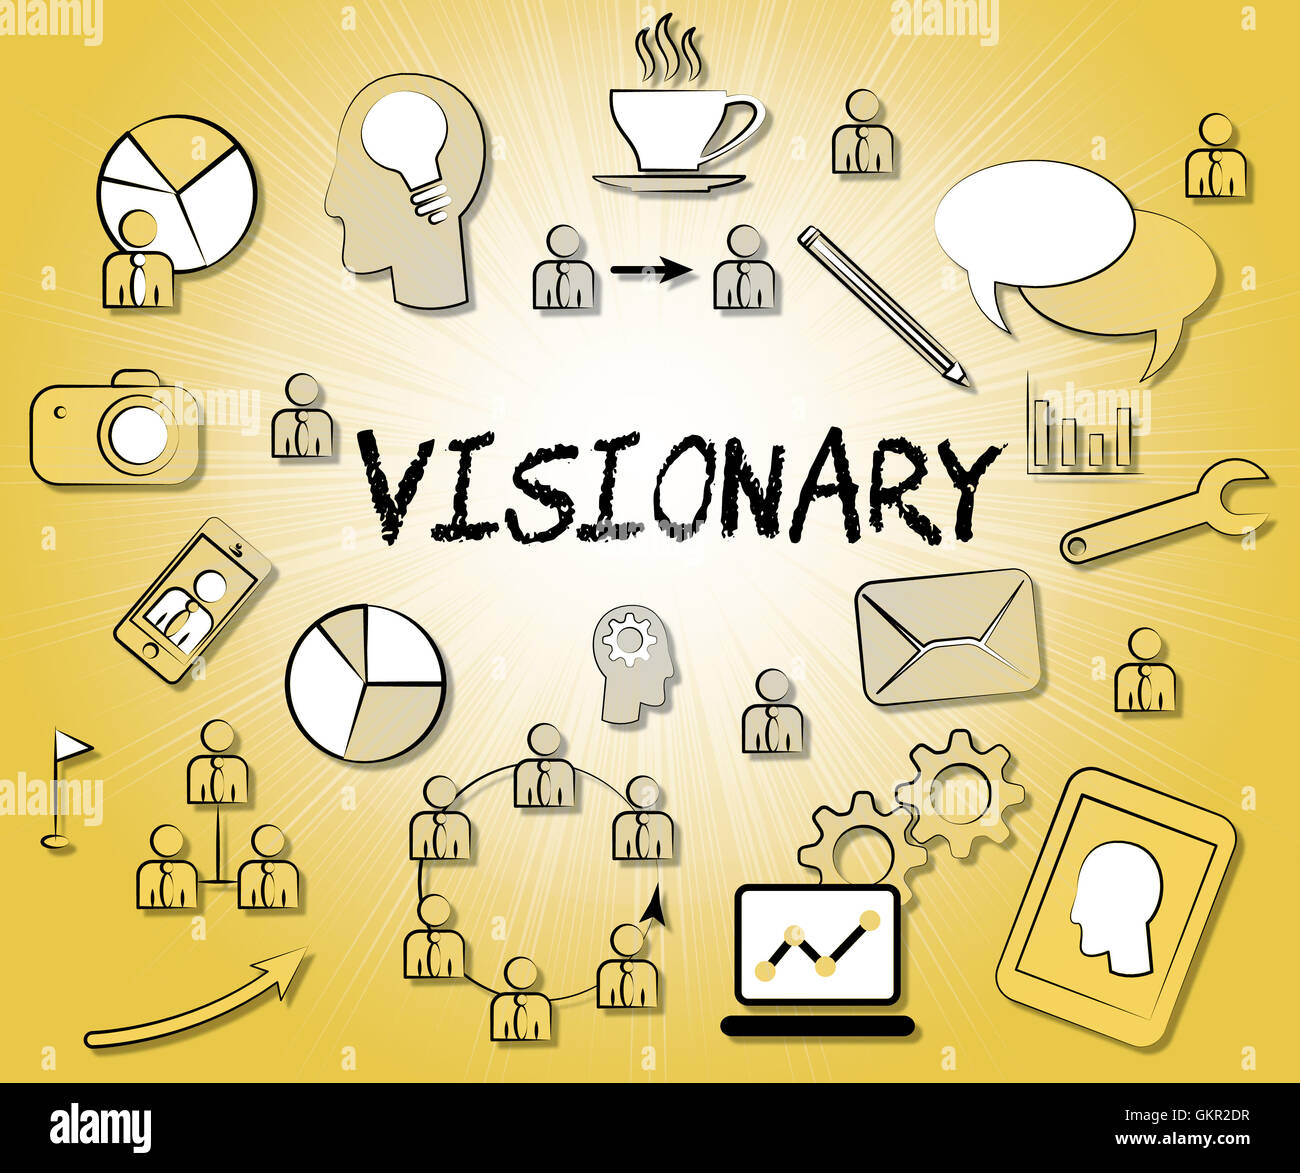 Visionary Icons Representing Insights Strategist And Ideals Stock Photo